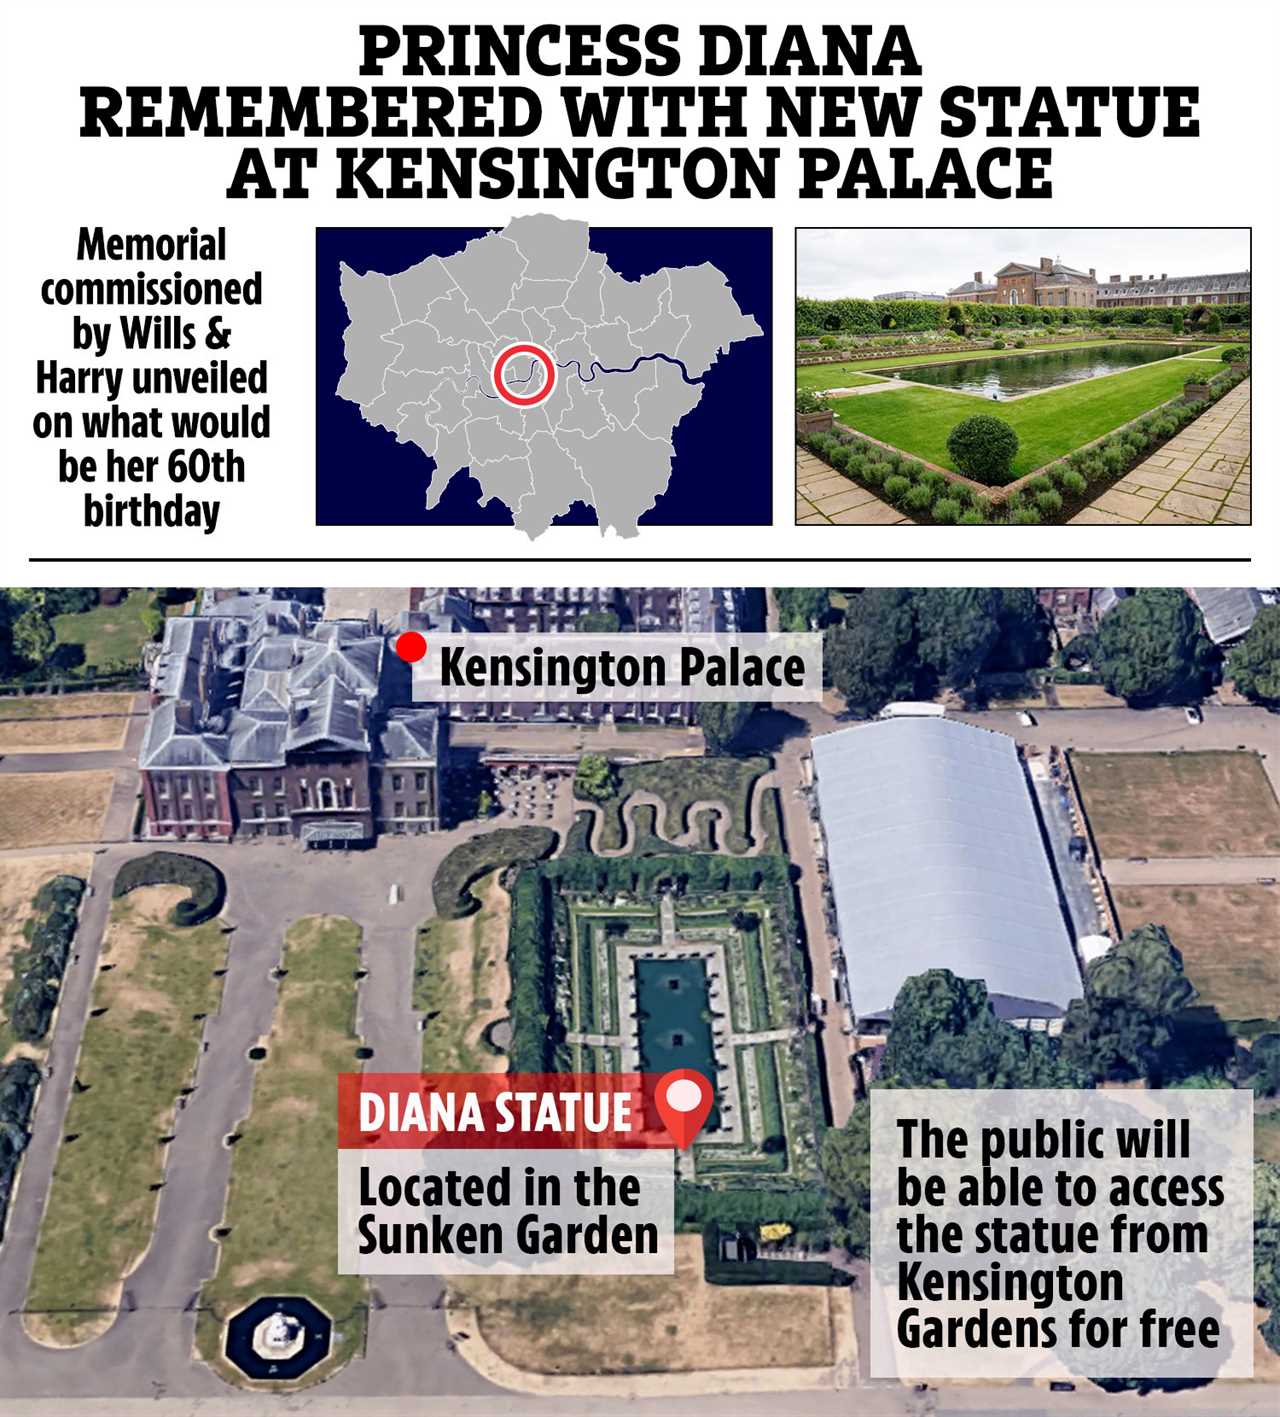 The statue is located in one of Diana's favourite parts of the Palace